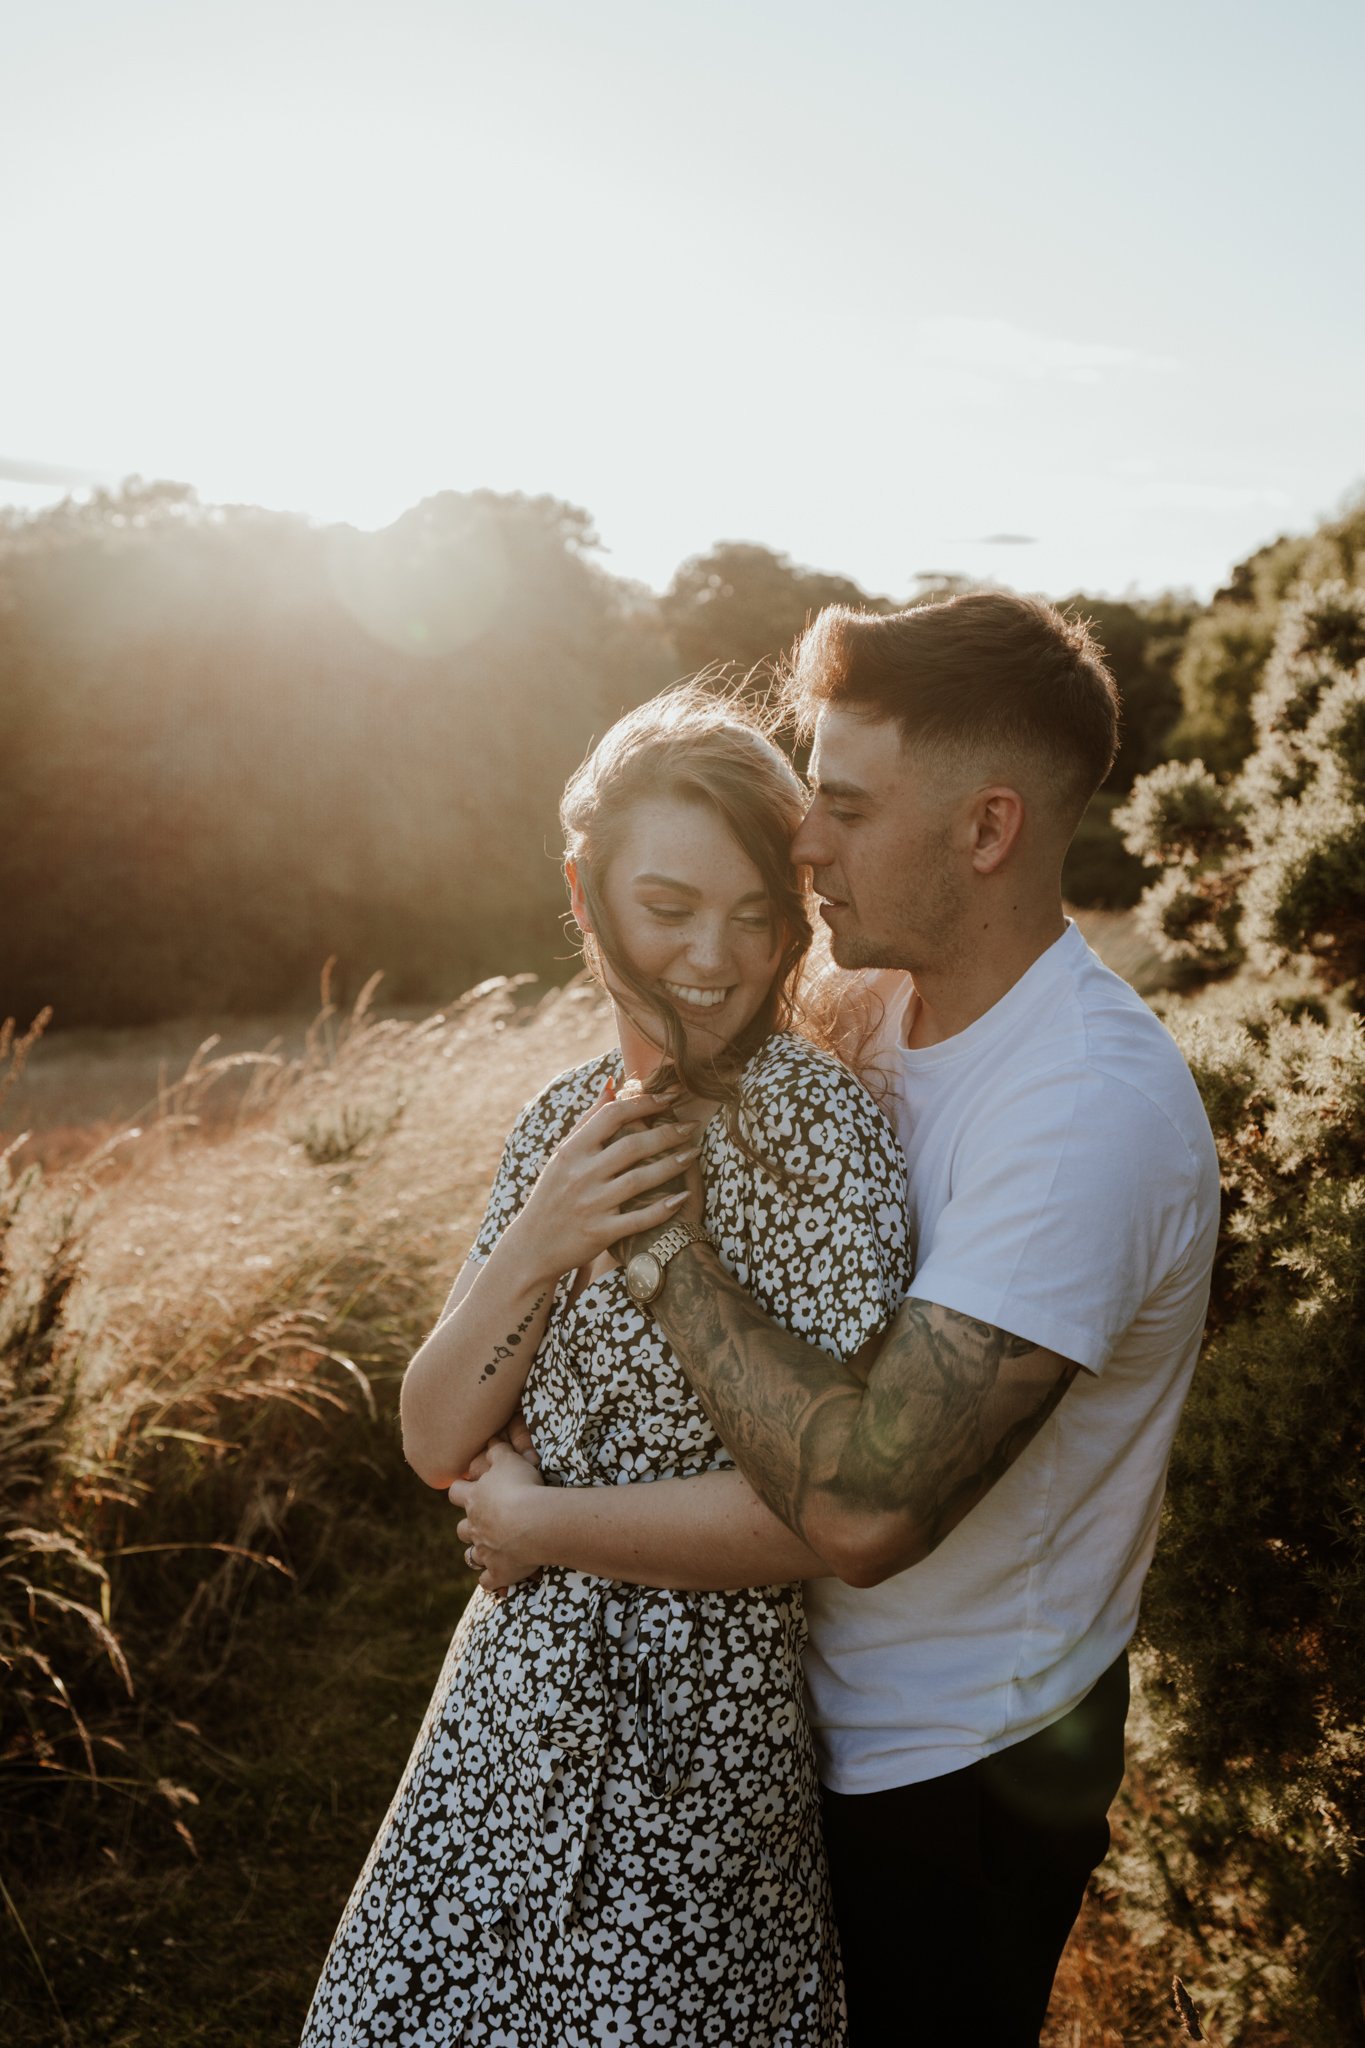 Angus Scotland Engagement and Wedding Photographer - Emily and Gabriel - Adventure Couple Session14.jpg